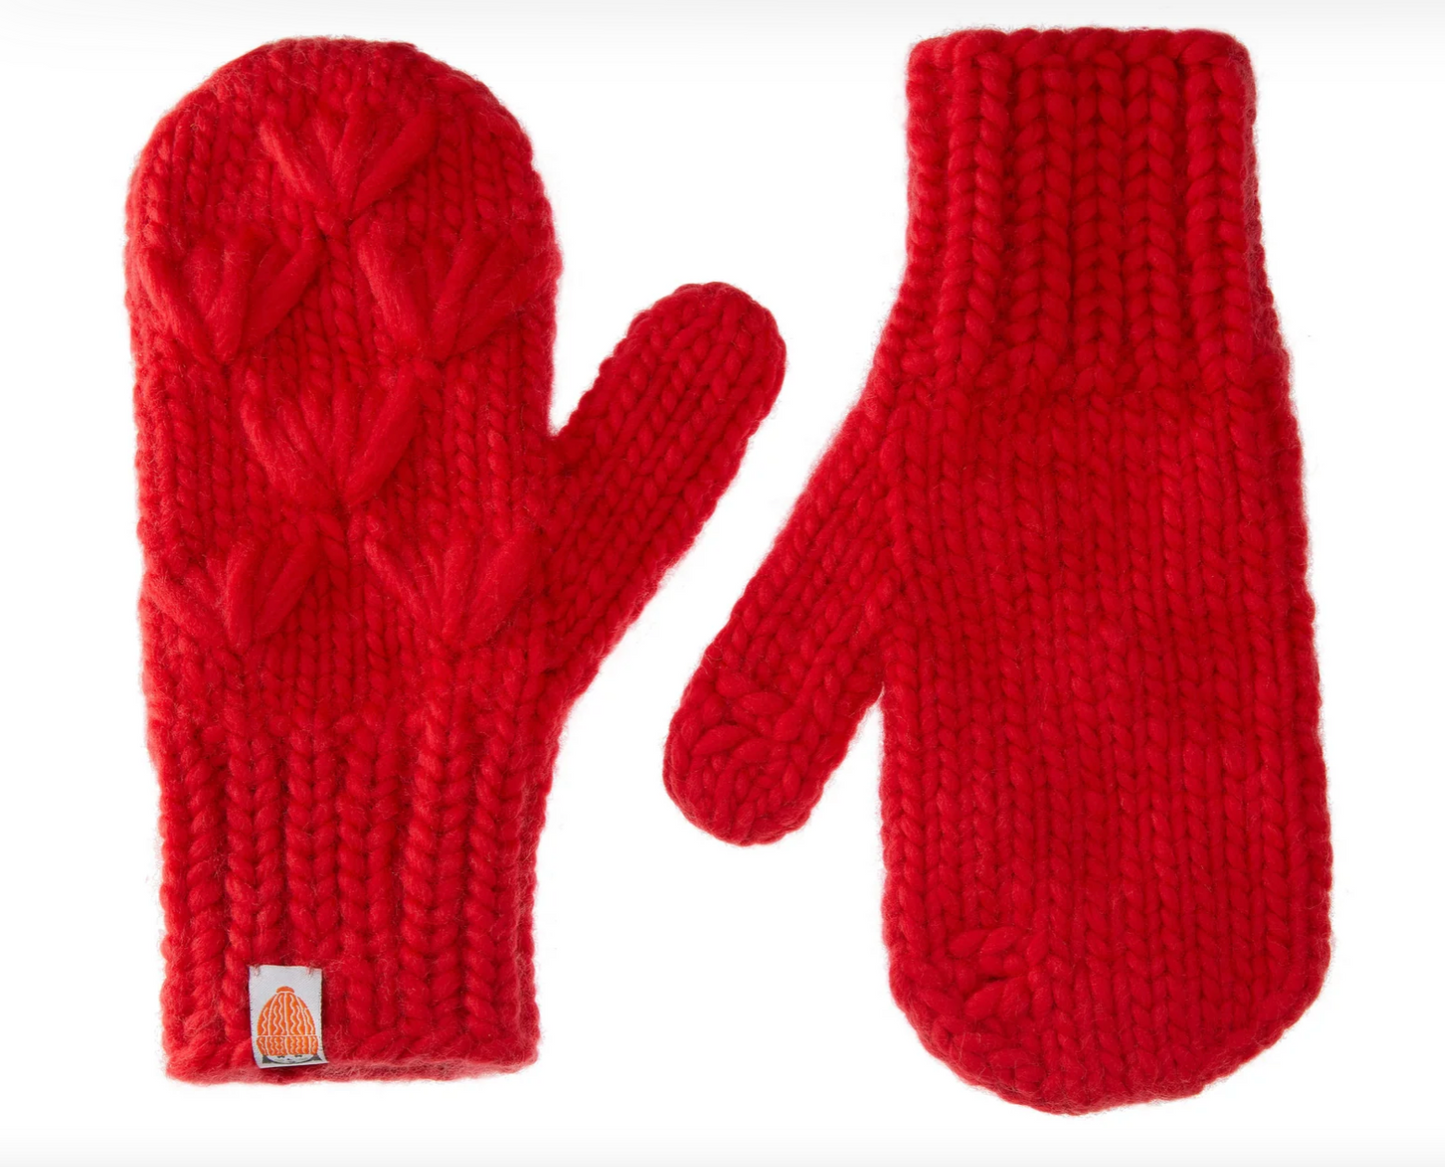 The Motley Mittens by Sh*t That I Knit